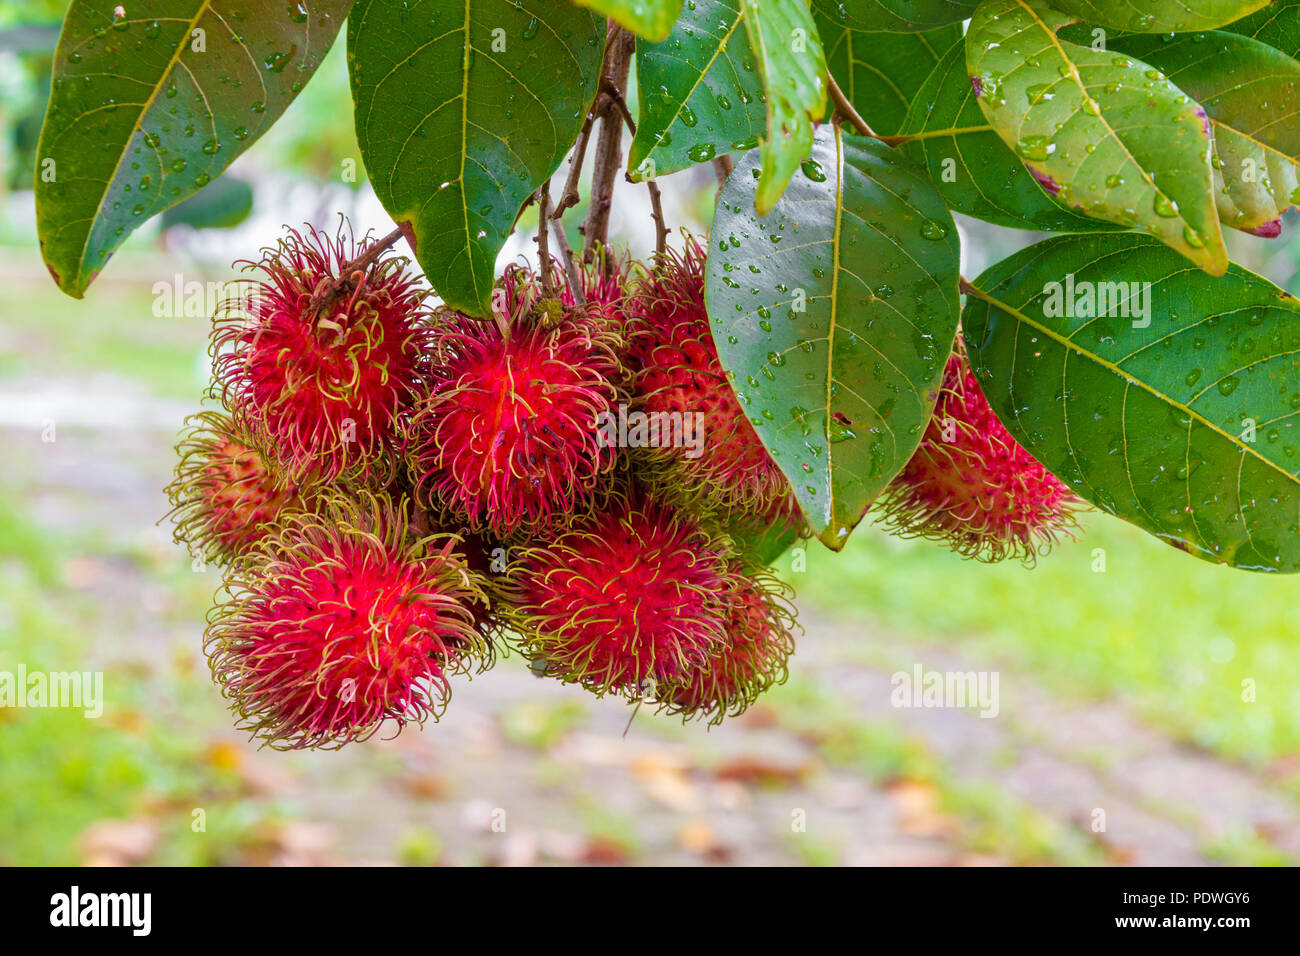 A cluster of ripe red rambutan fruits (Nephelium lappaceum) hanging on a tree, cultivated in Malaysia. Its name is a reference to the numerous... Stock Photo